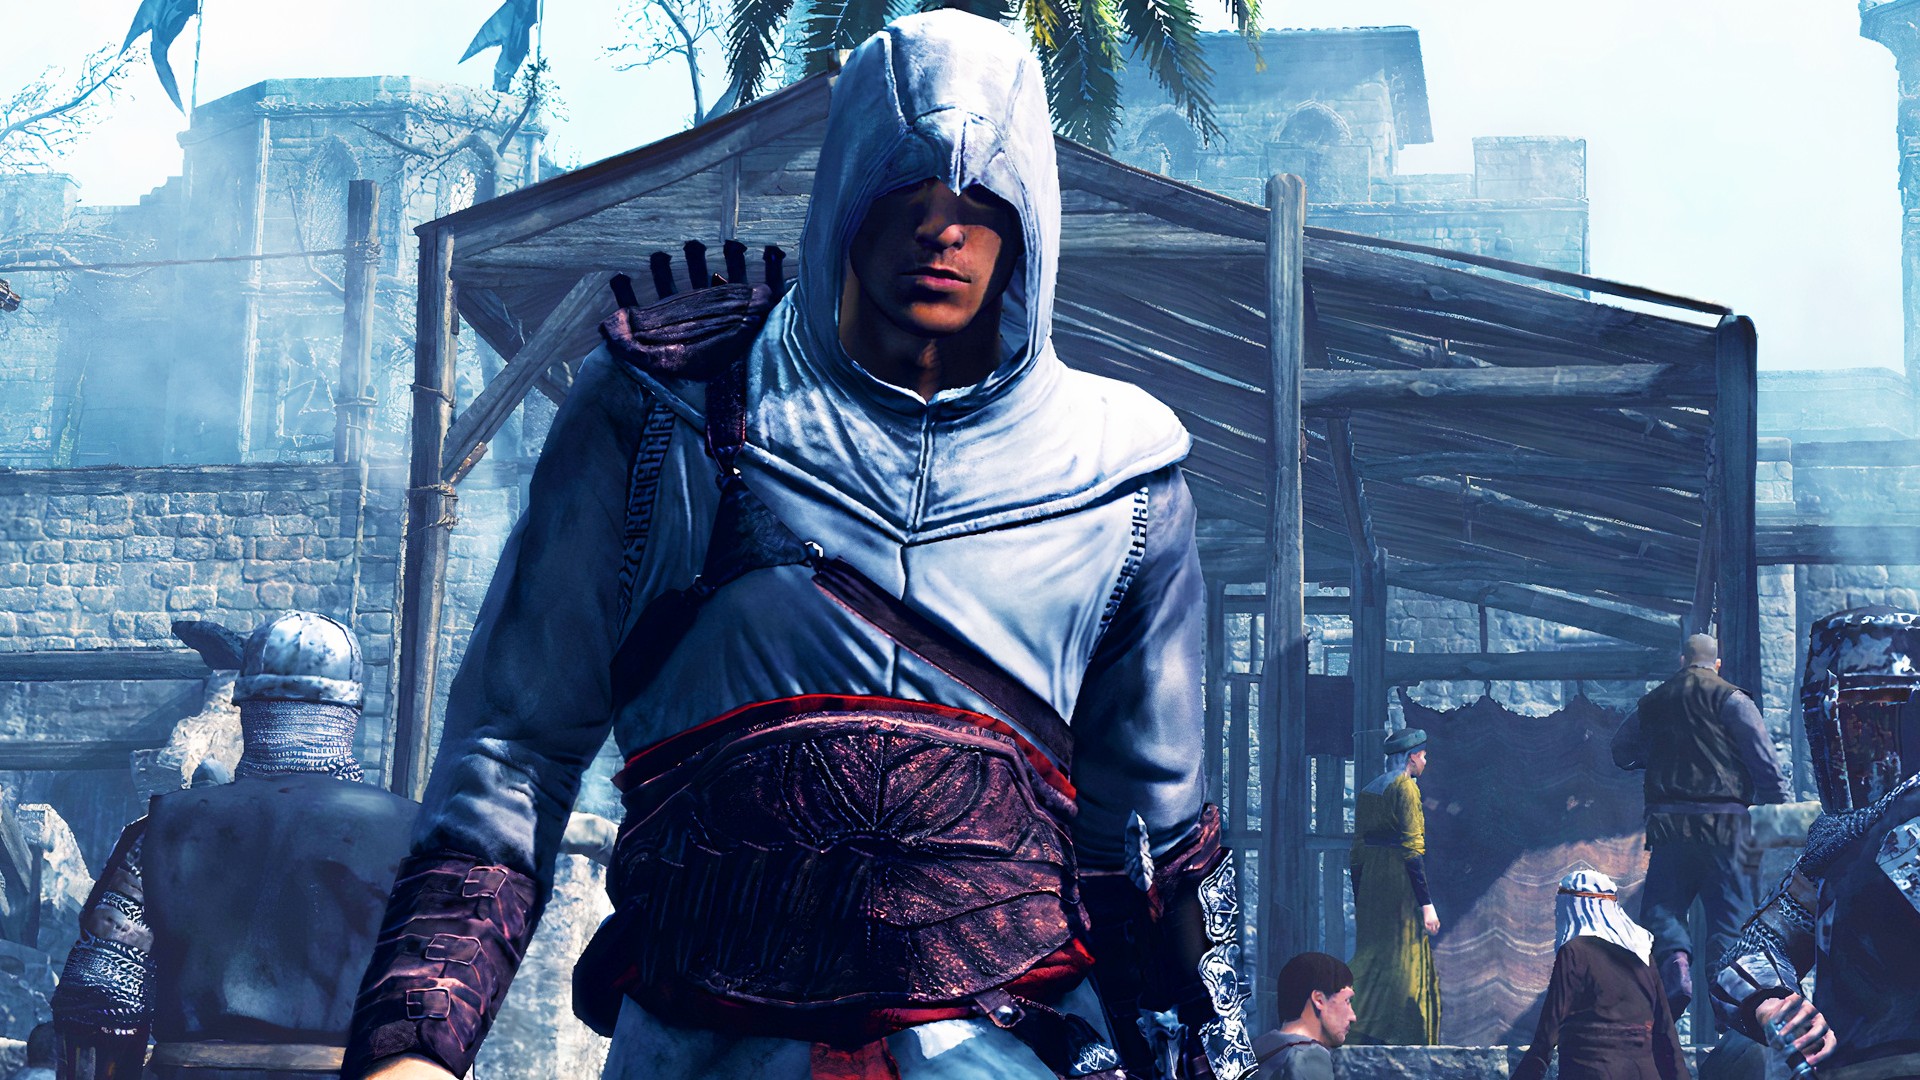 Assassin's Creed Rumors - Valhalla DLC turned into full spin-off